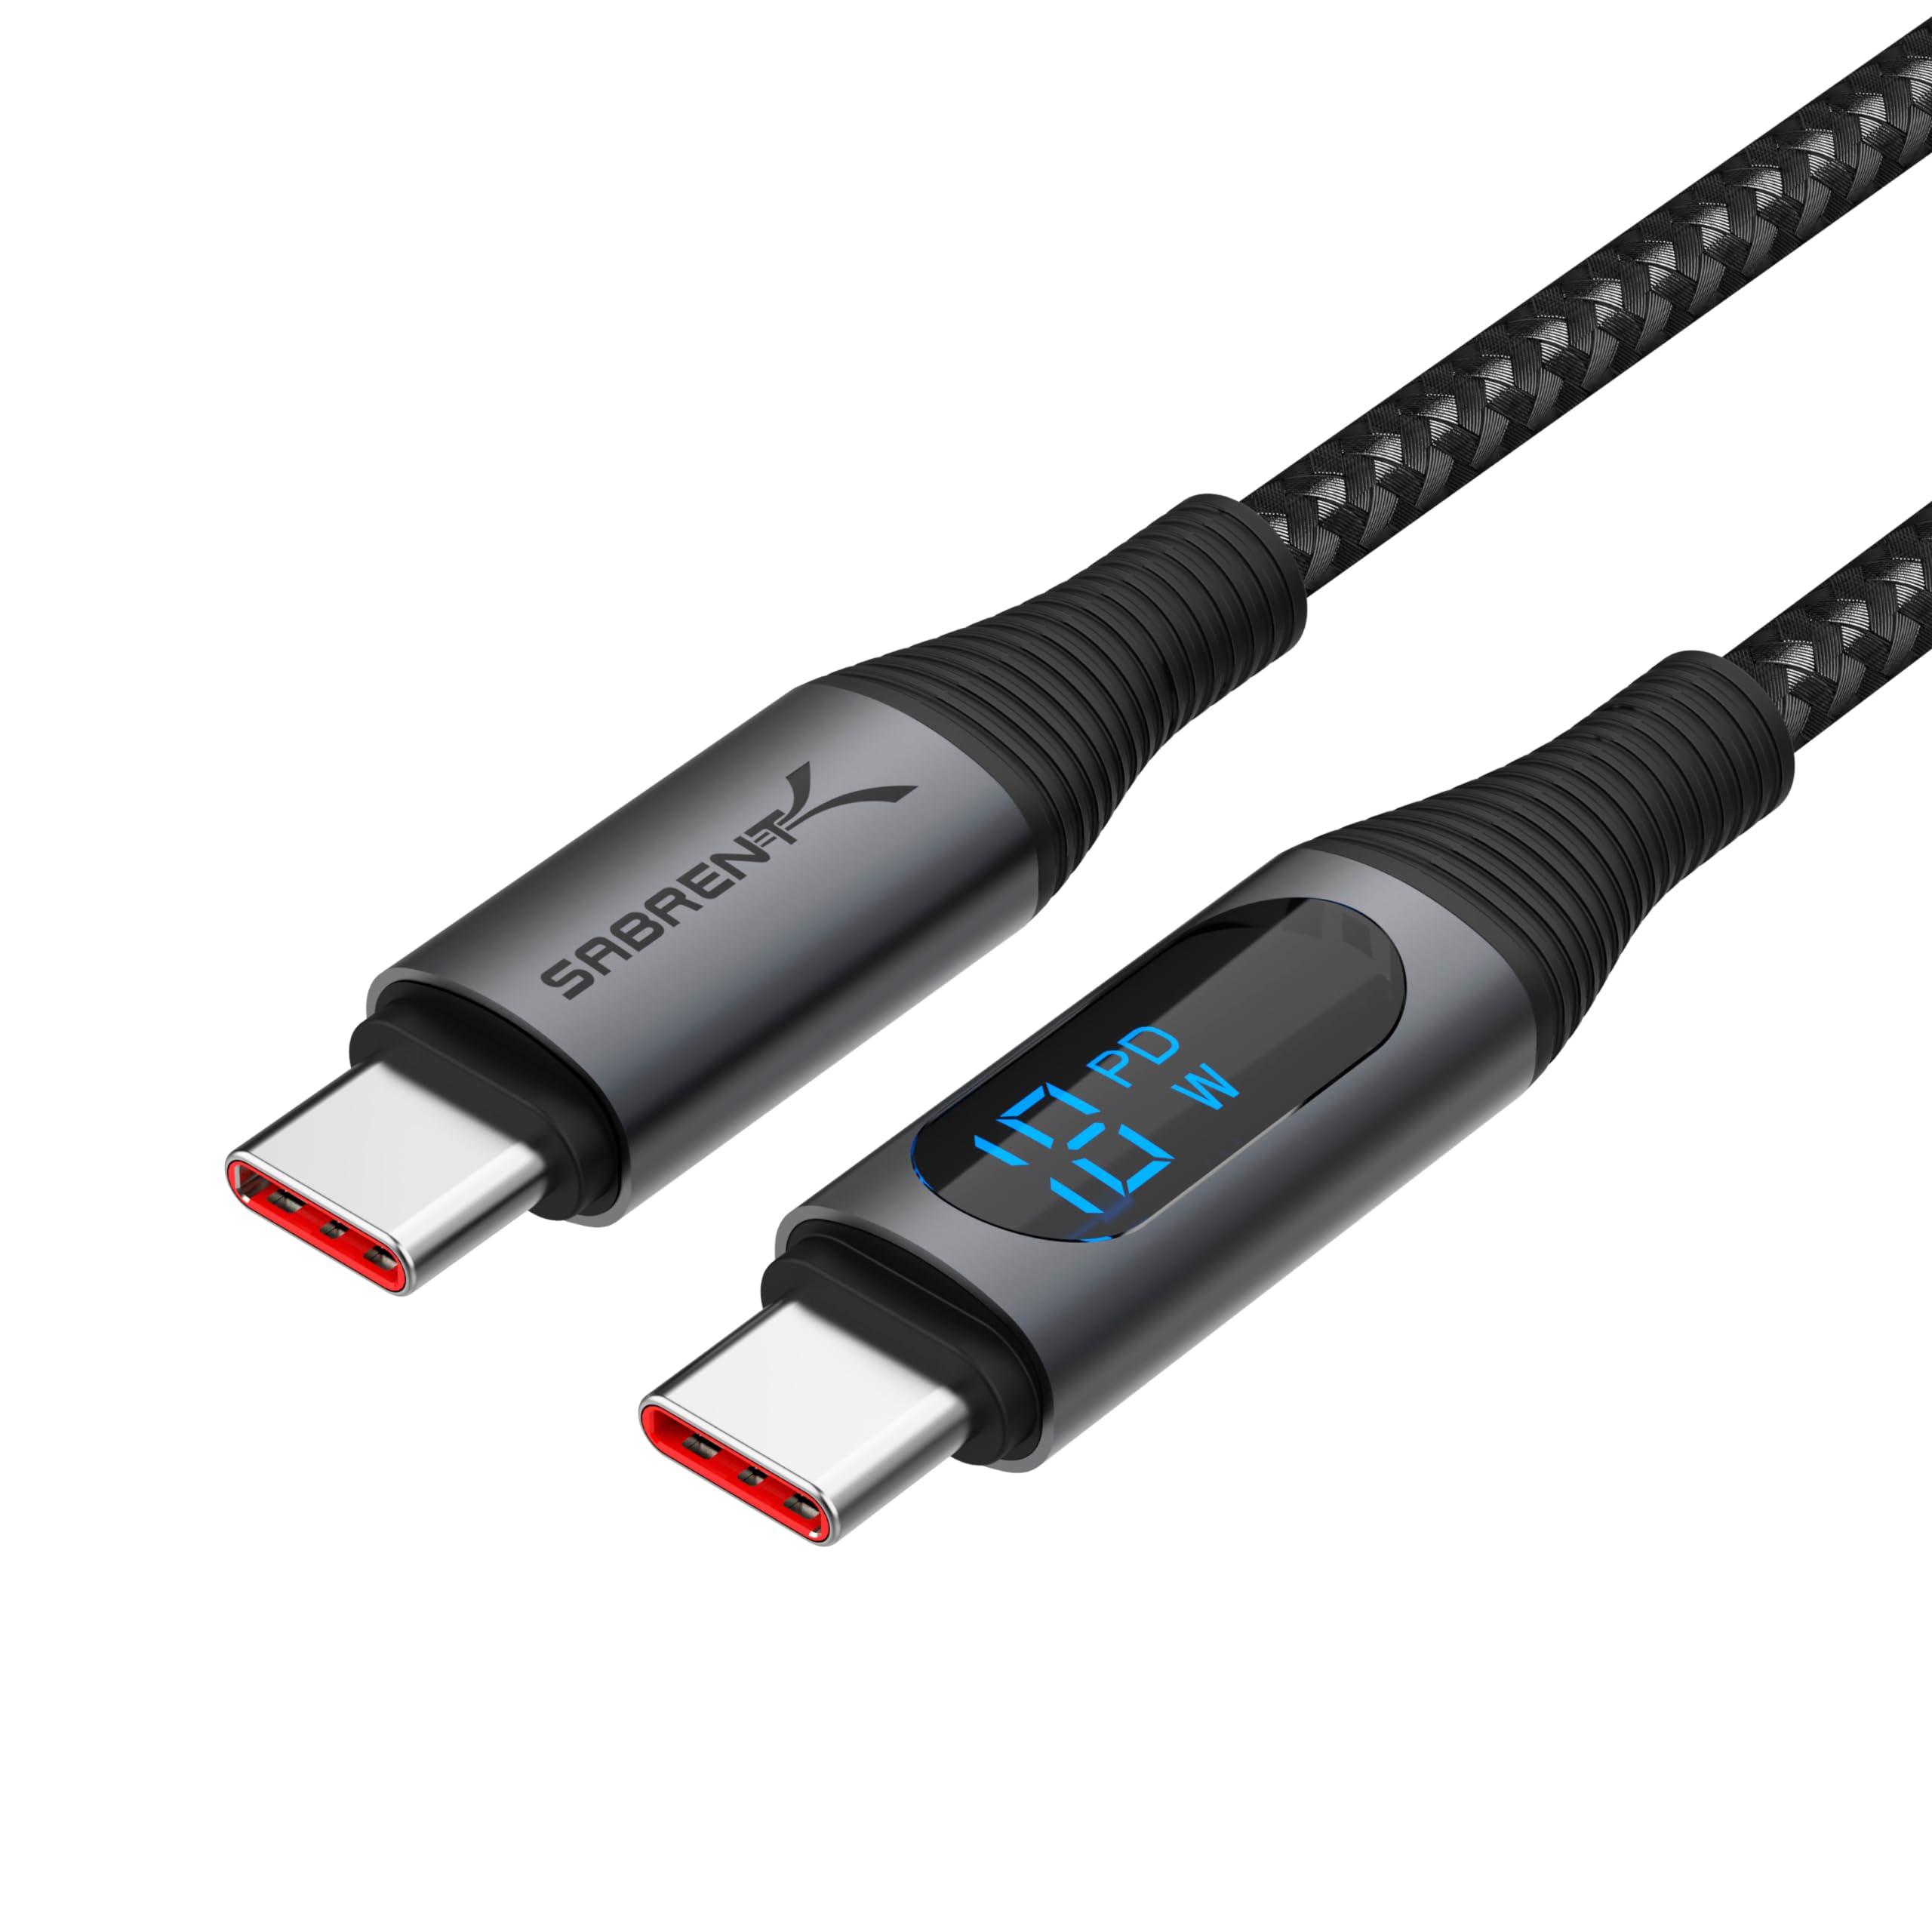 SABRENT USB C to USB C Charging Cable with Smart Display, 2M/6.6FT Long, E-Marker Chip, 100W Charging and 480Mbps Data Transfer Speeds, for Laptops, Smartphones, Tablets (CB-C2C2)